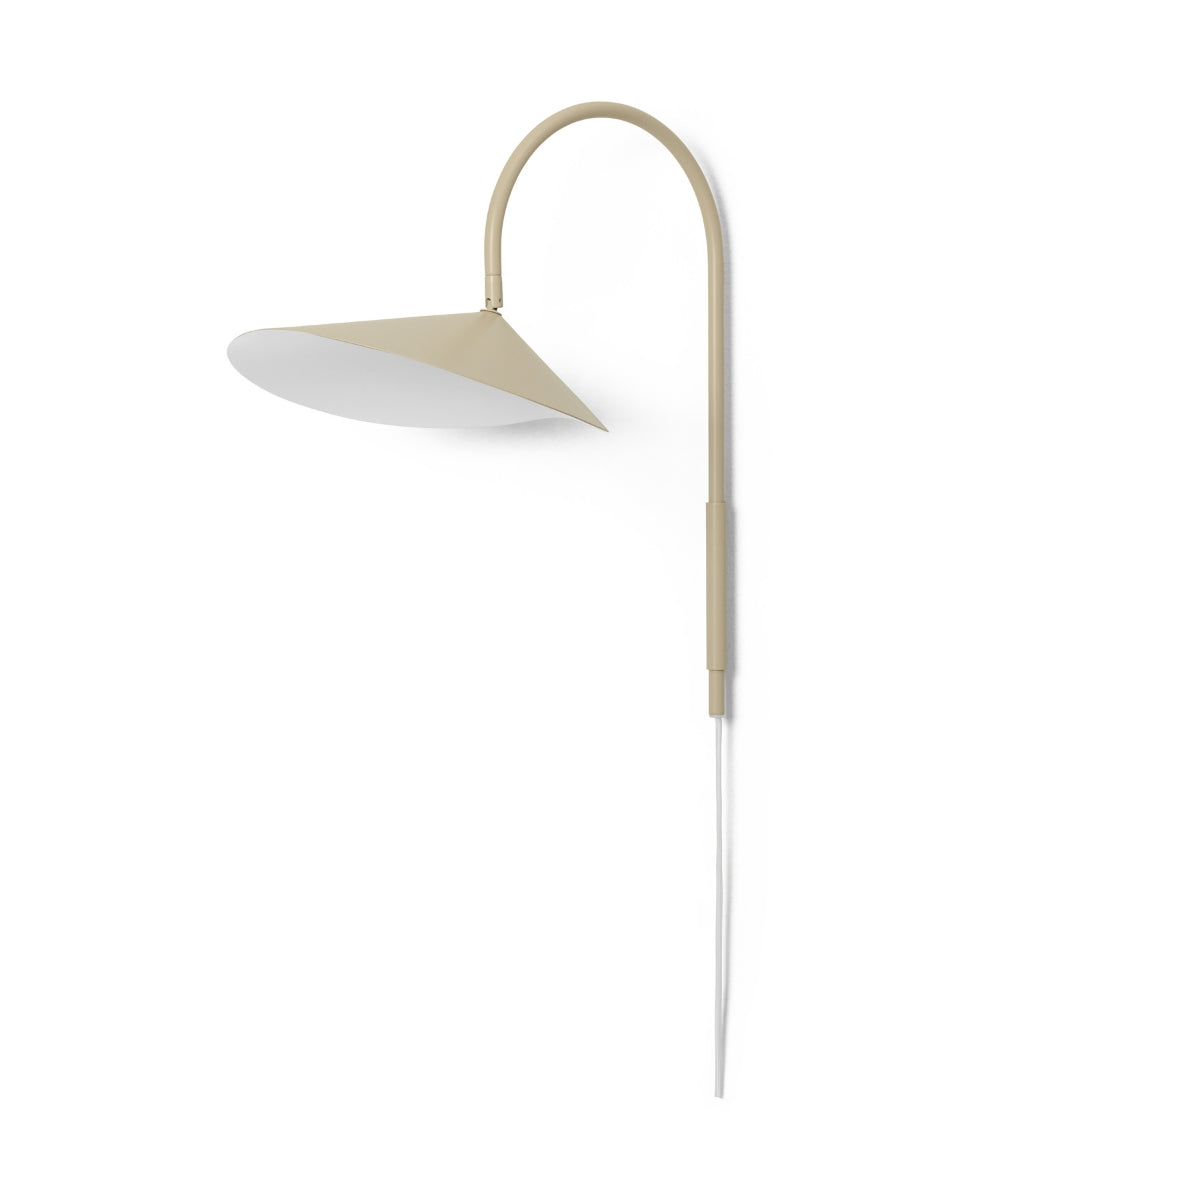 ferm living arum swivel wall lamp, ideal minimalist bedside light. Available to buy from someday designs. #colour_cashmere